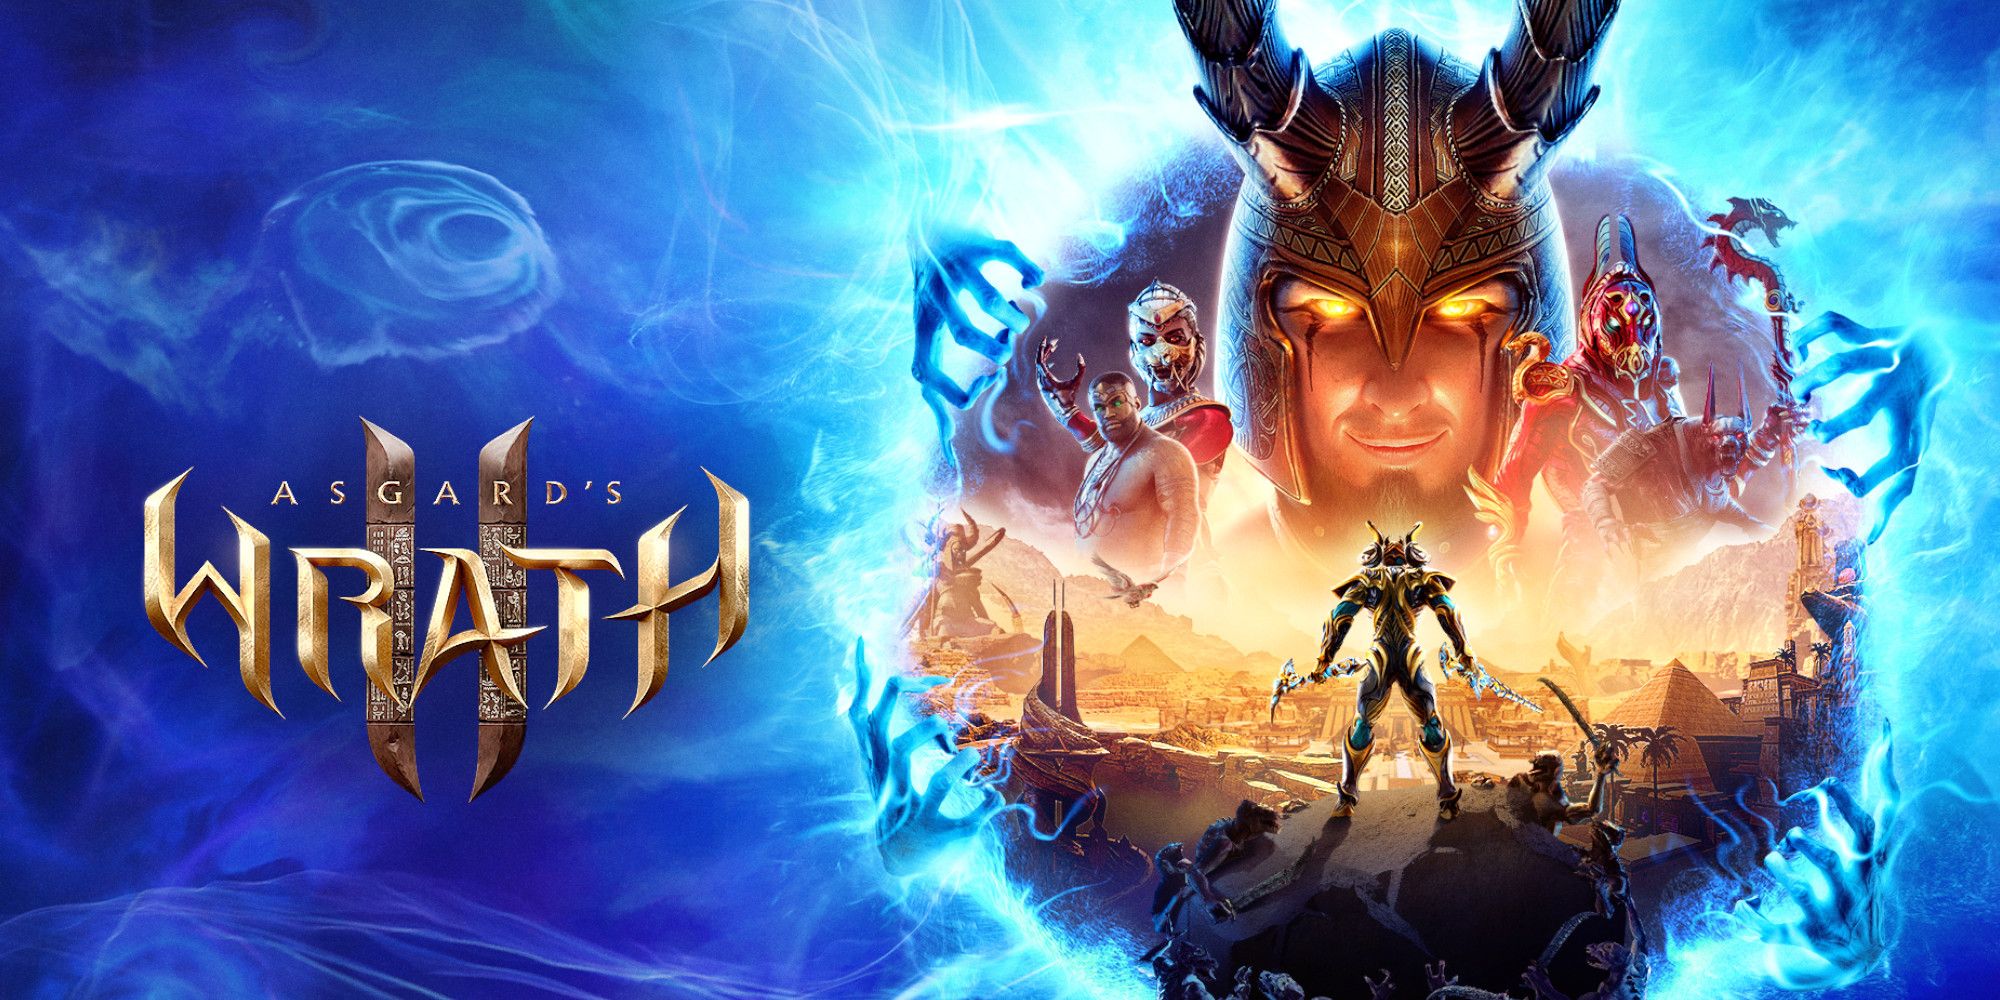 asgard-s-wrath-2-review-is-delayed-because-i-can-t-play-vr-without-hurting-myself-fyuu